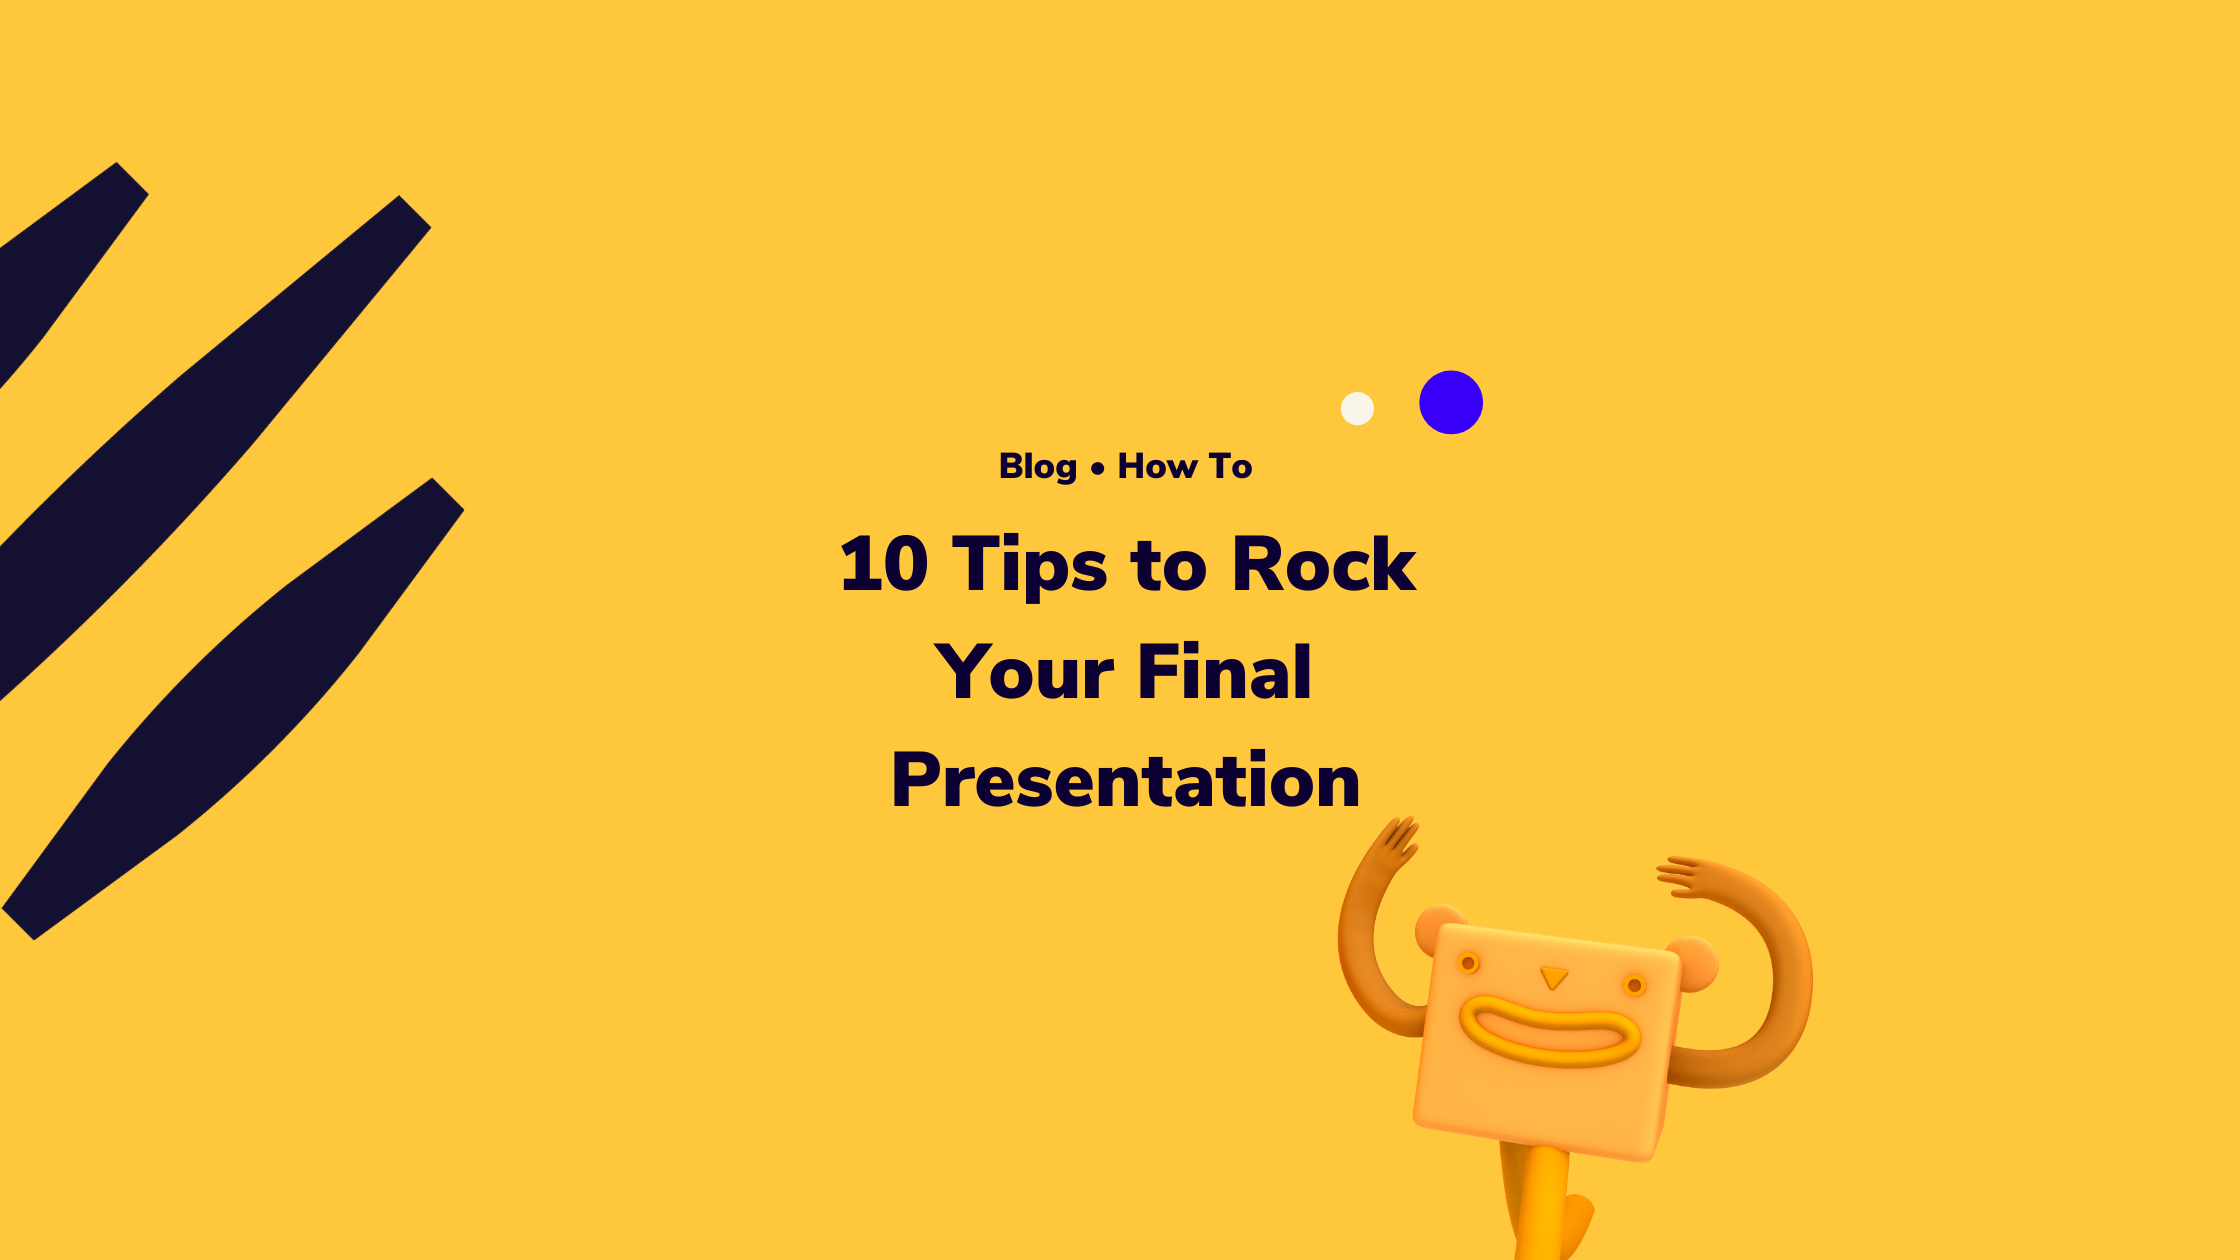 10 Tips to Rock Your Final Presentation